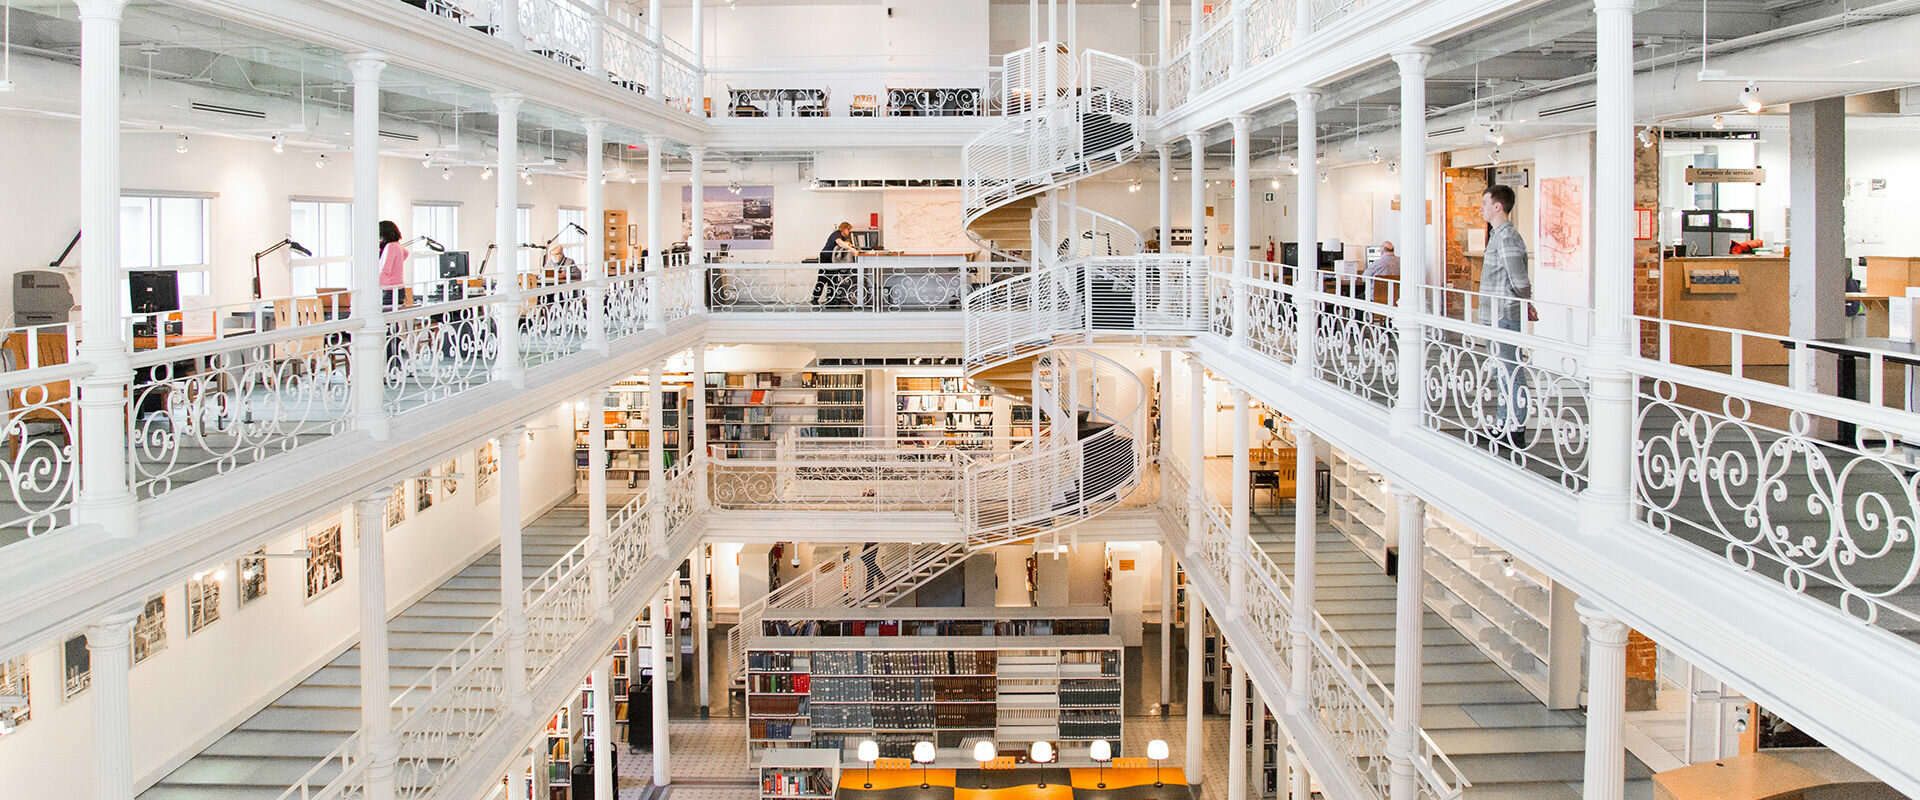 24 free or cheap things to do in Montreal: the library